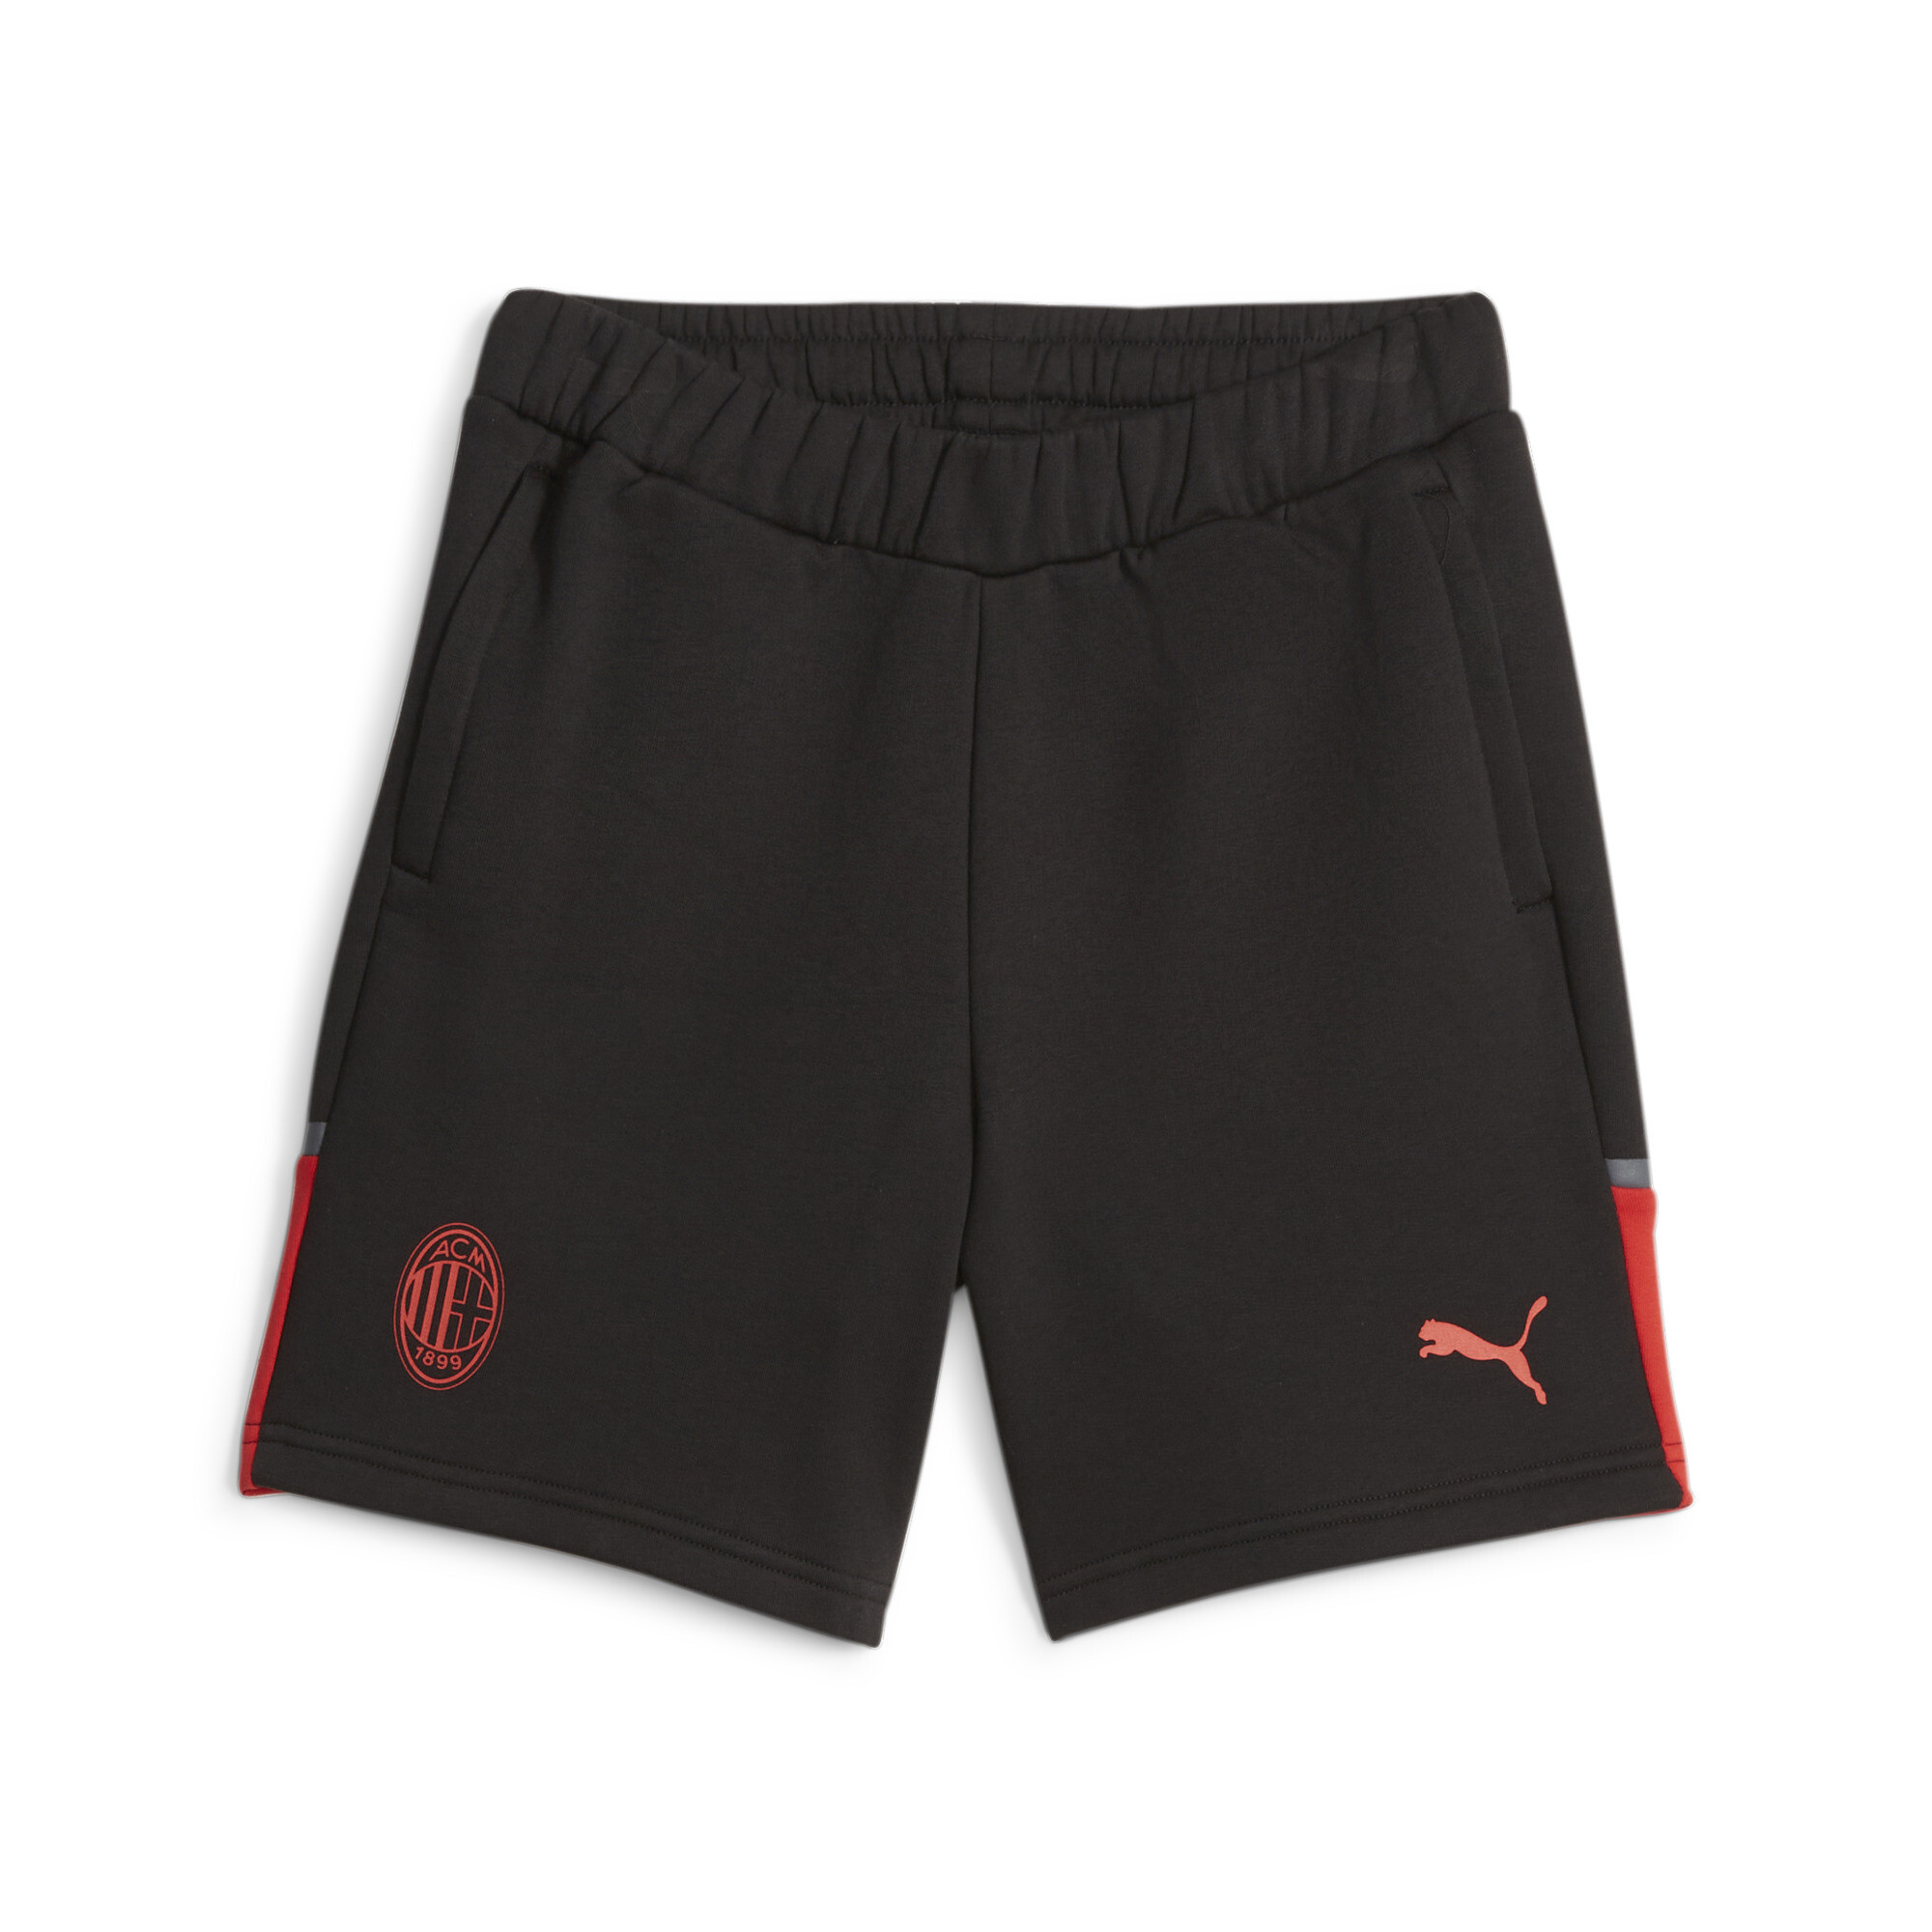 Men's PUMA AC Milan Football Casuals Shorts In Black, Size Large